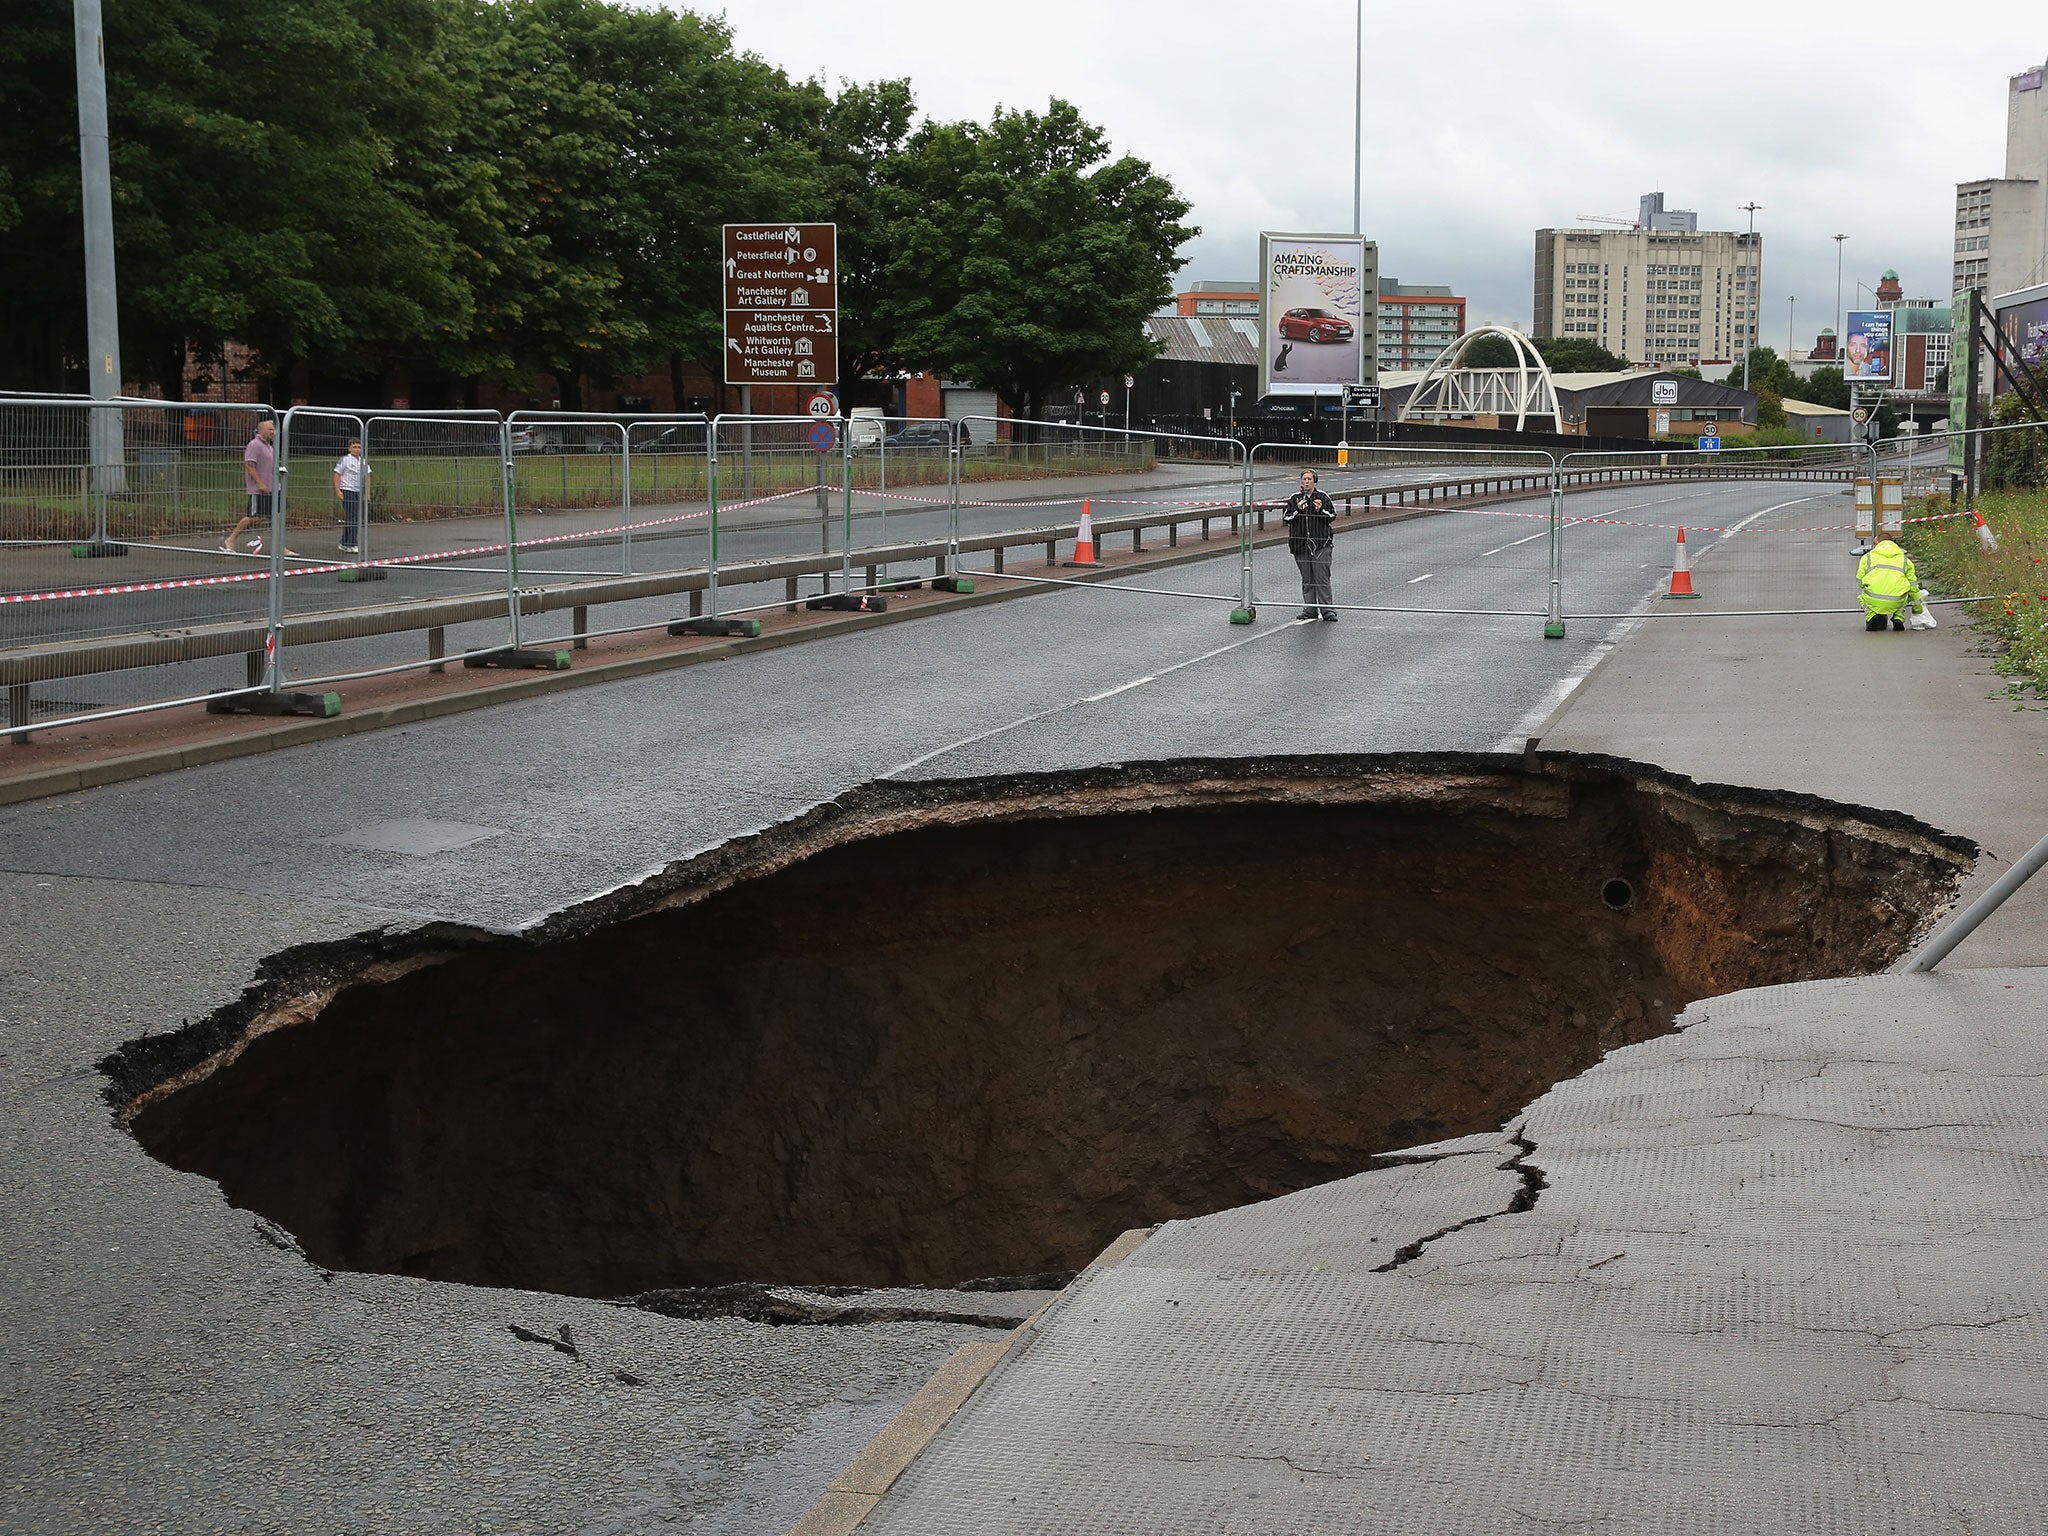 The sinkhole suddenly appeared on a busy Manchester road on Friday